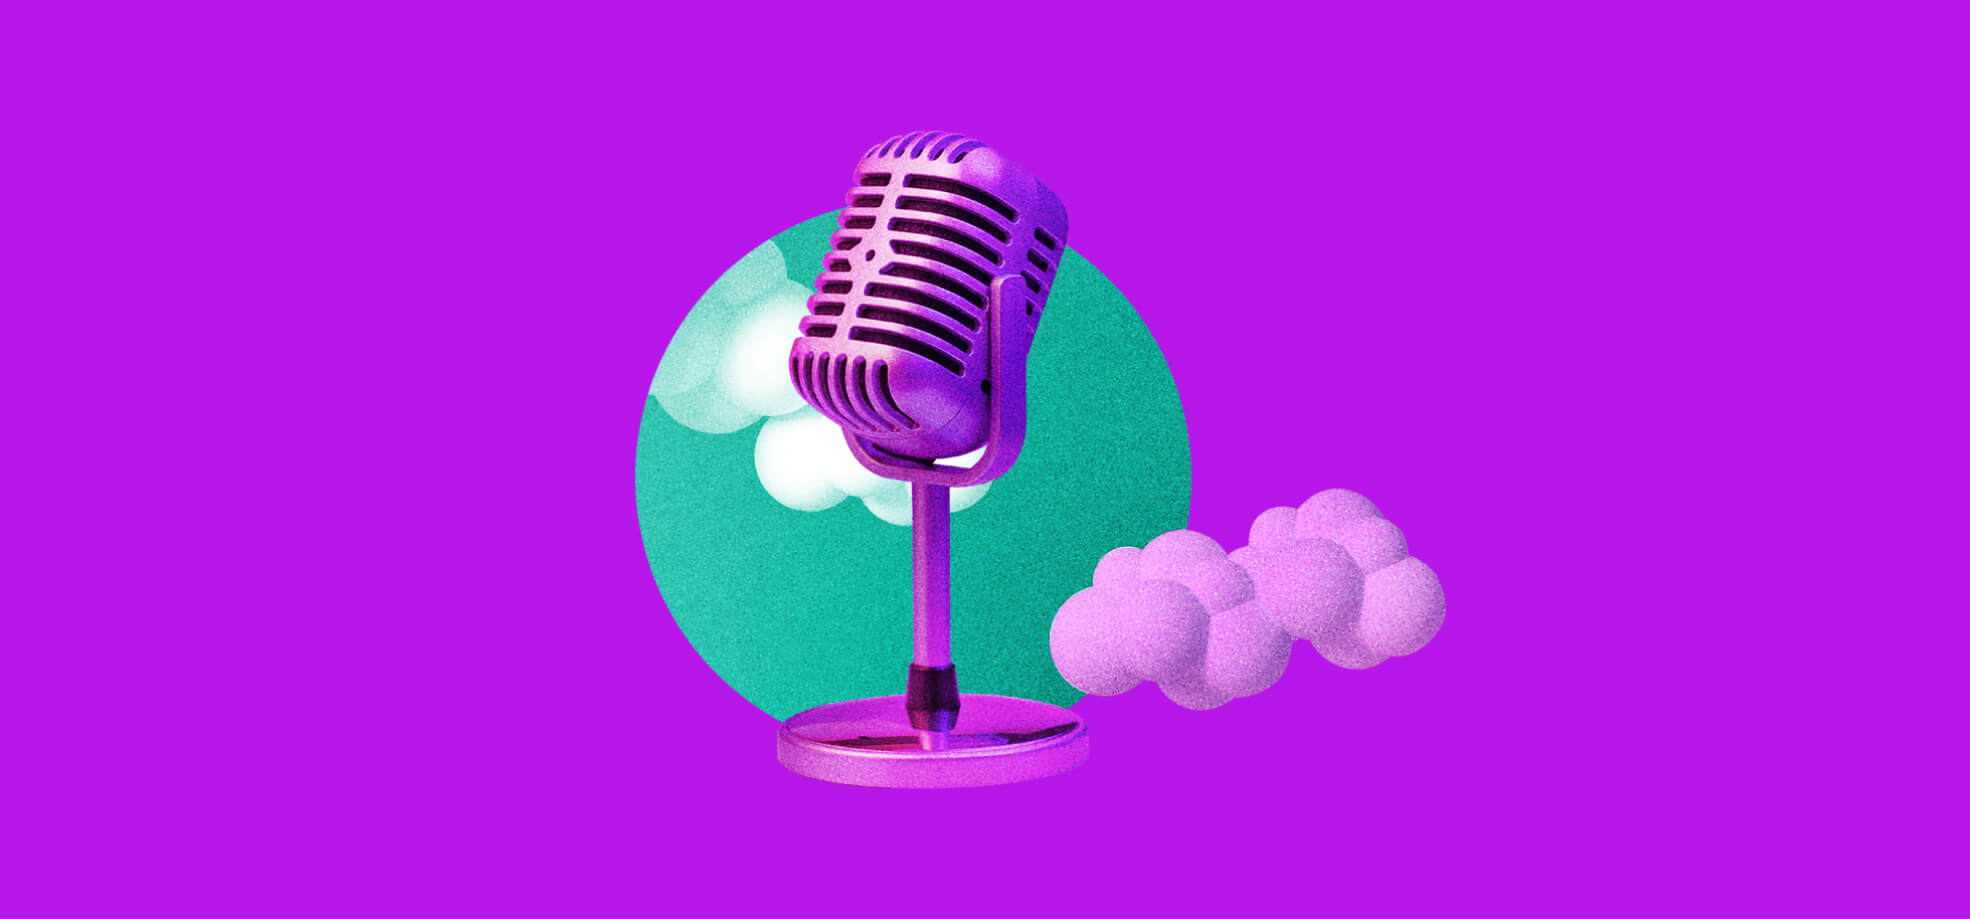 illustration of microphone with clouds on the blue background